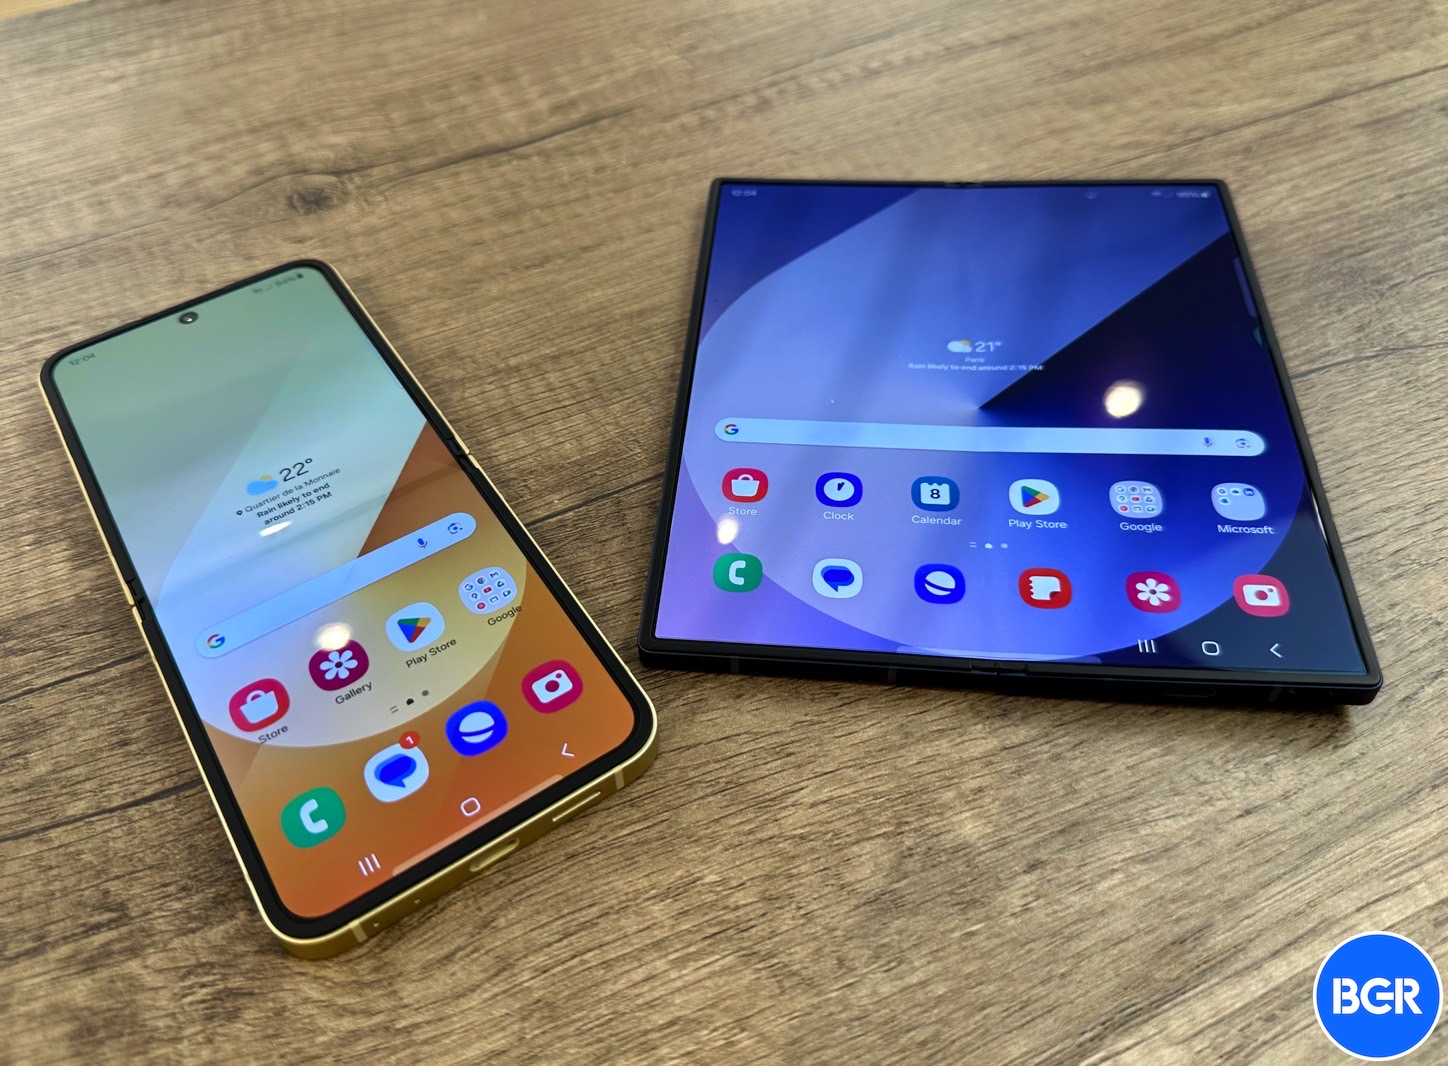 Galaxy Z Flip 6 and Galaxy Z Fold 6: Can you spot the crease?